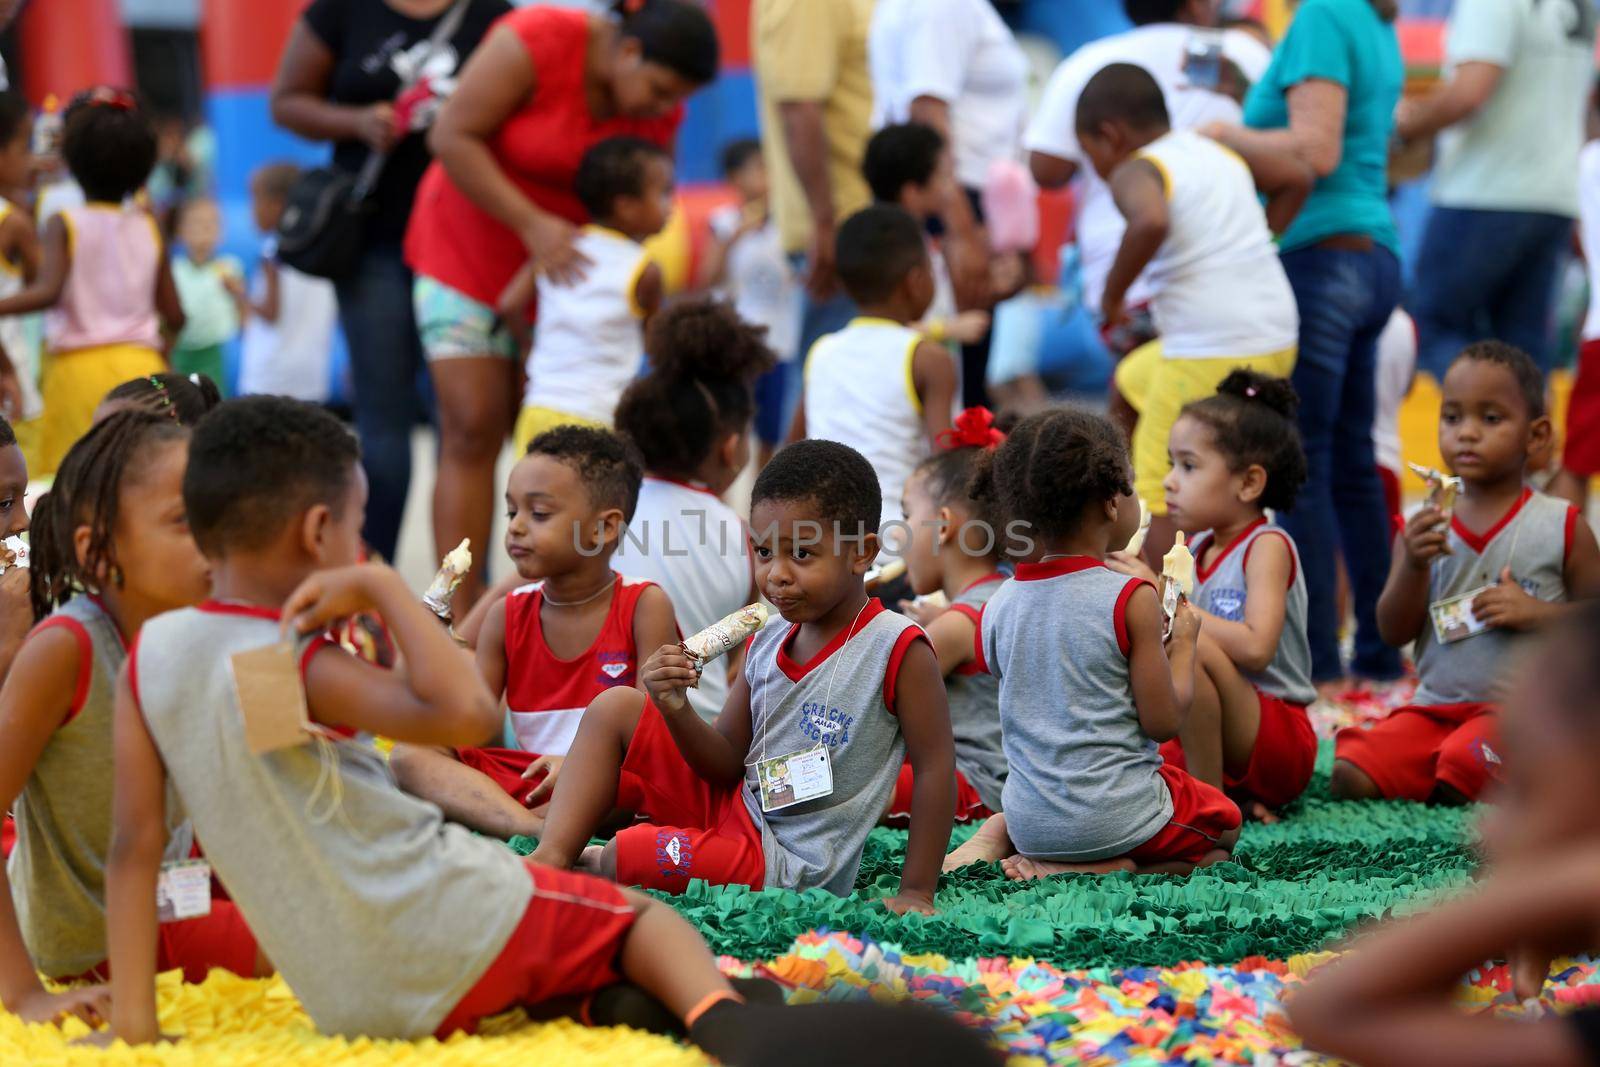 salvador, bahia / brazil - october 8, 2018: Children from Bahia day care centers are seen during an event at the Fonte Nova Arena in the city of Salvador.